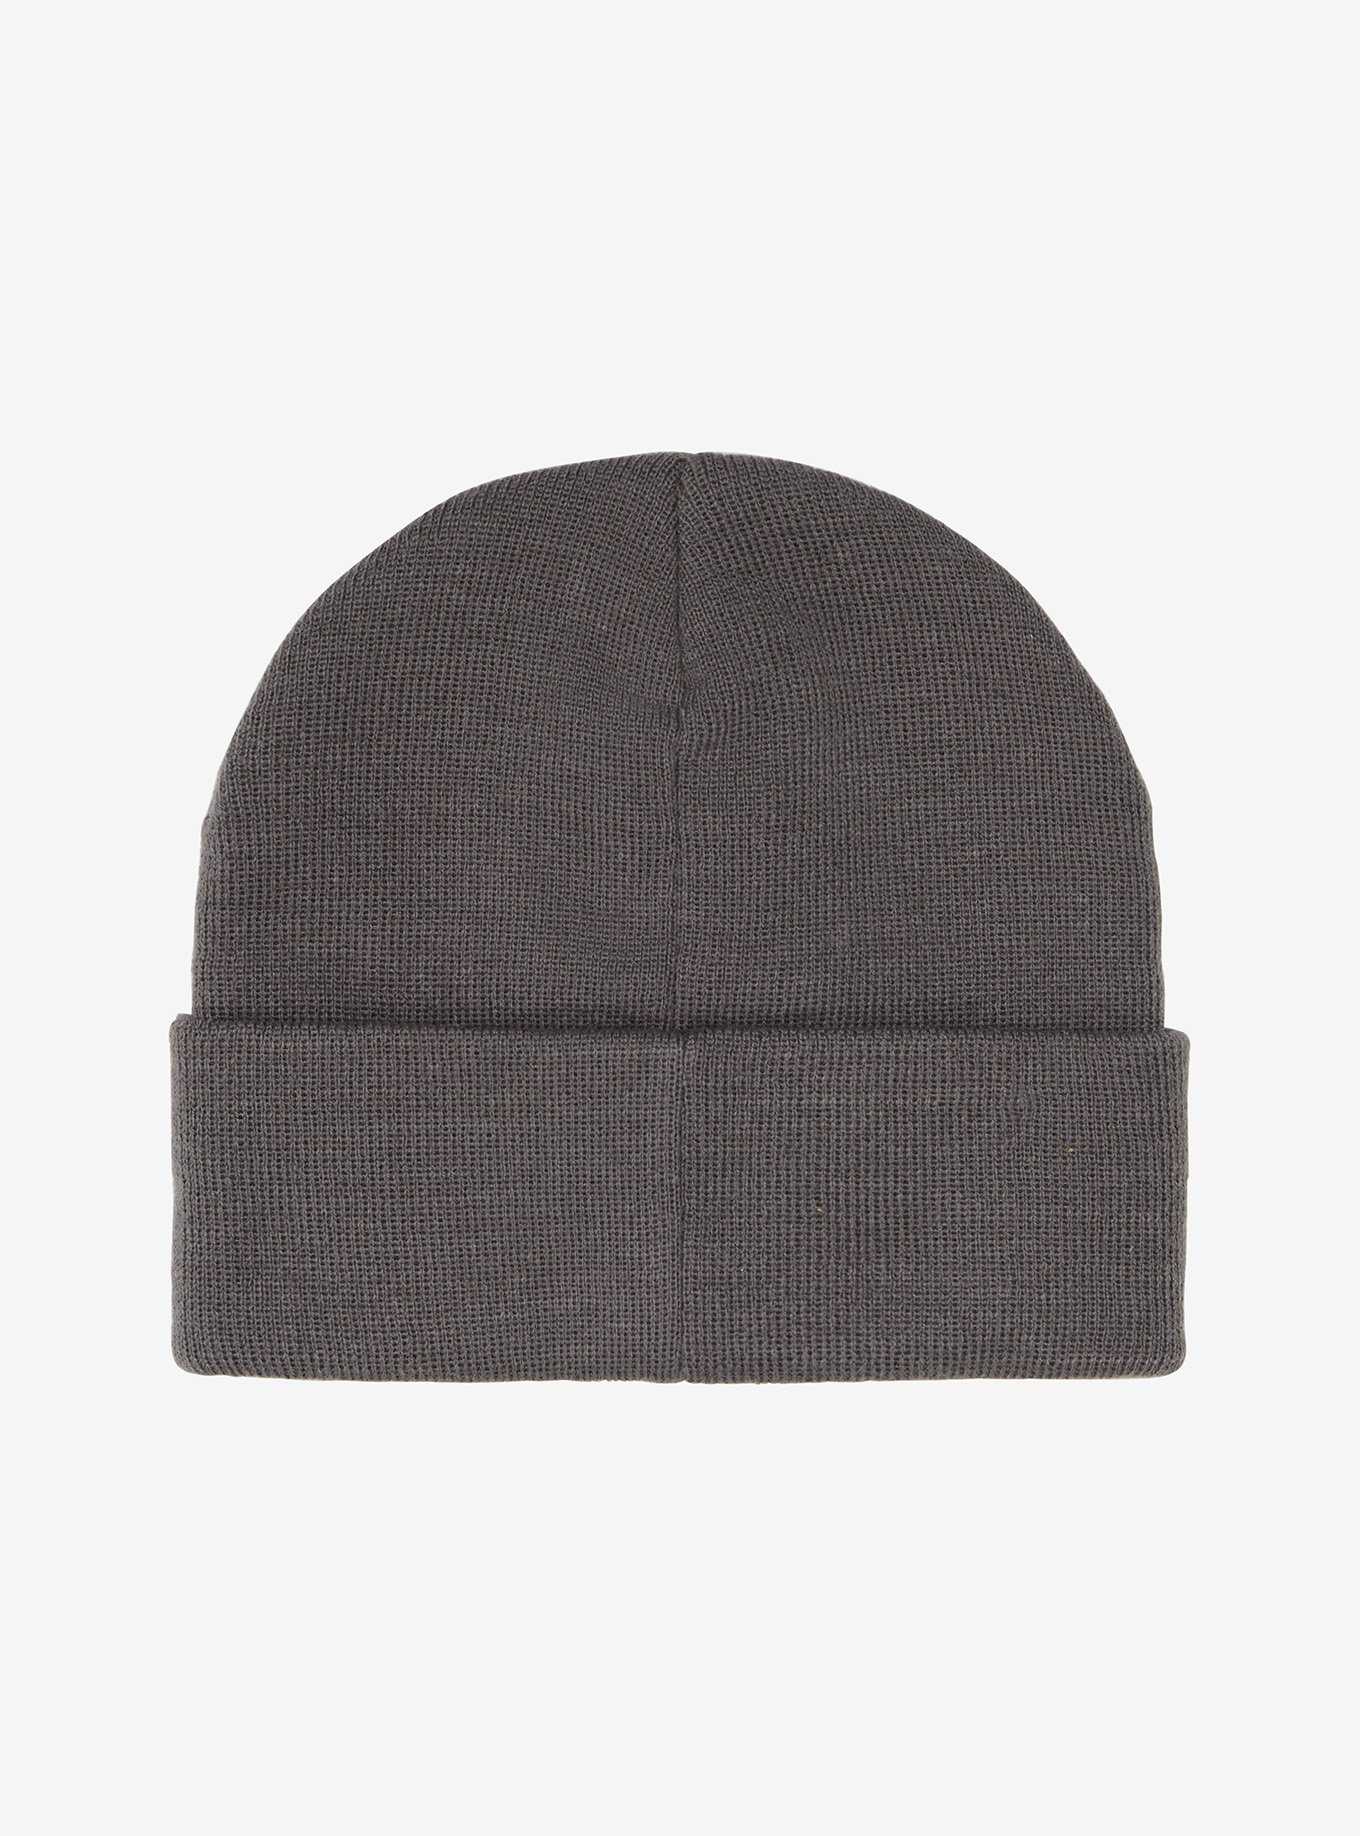 Cool Beanies: Slouchy, BoxLunch Beanies Culture & | Trendy Pop